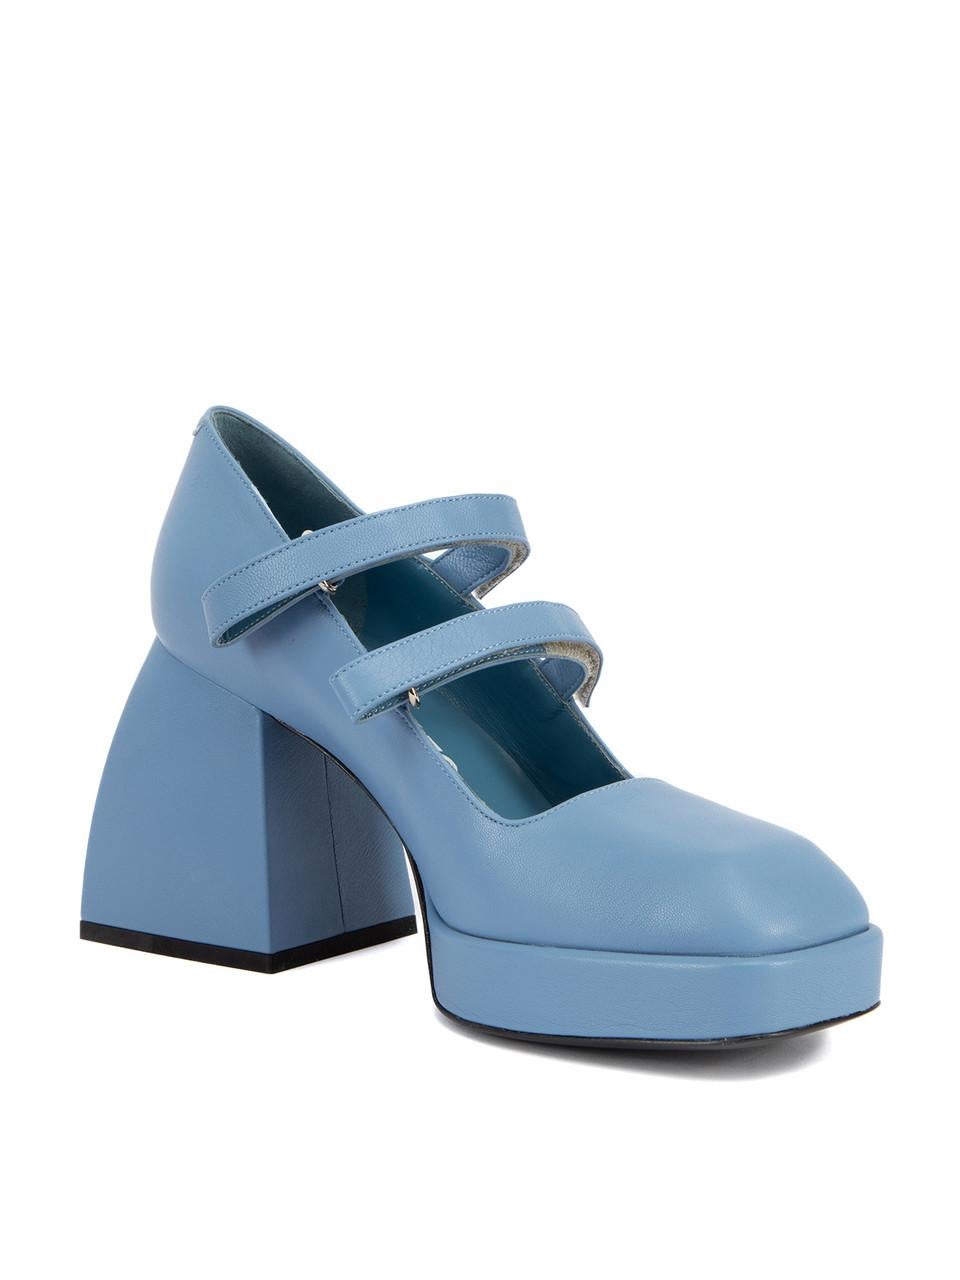 CONDITION is Never Worn, with tag. No visible wear to heels is evident on this brand new Nodaleto designer resale item. This item comes with the original dustbag and shoe box.
  
 Details
  Blue
 Leather
 Pumps
 Bulla Babies 
 Platform
 Square toe
